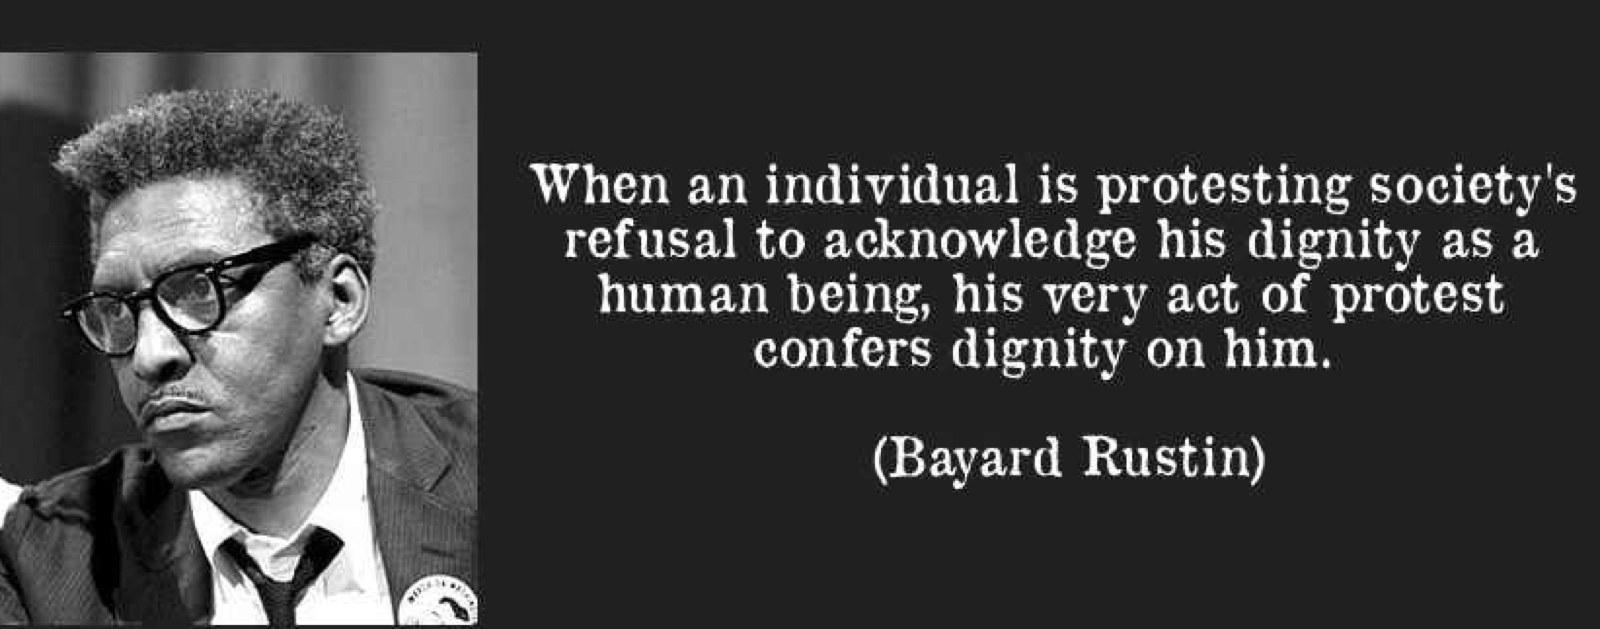 March, Bayard Rustin, quote-when-an-individual-is-protesting-society-s-refusal-to-acknowledge-his-dignity-as-a-human-being-his-bayard-rustin-160644